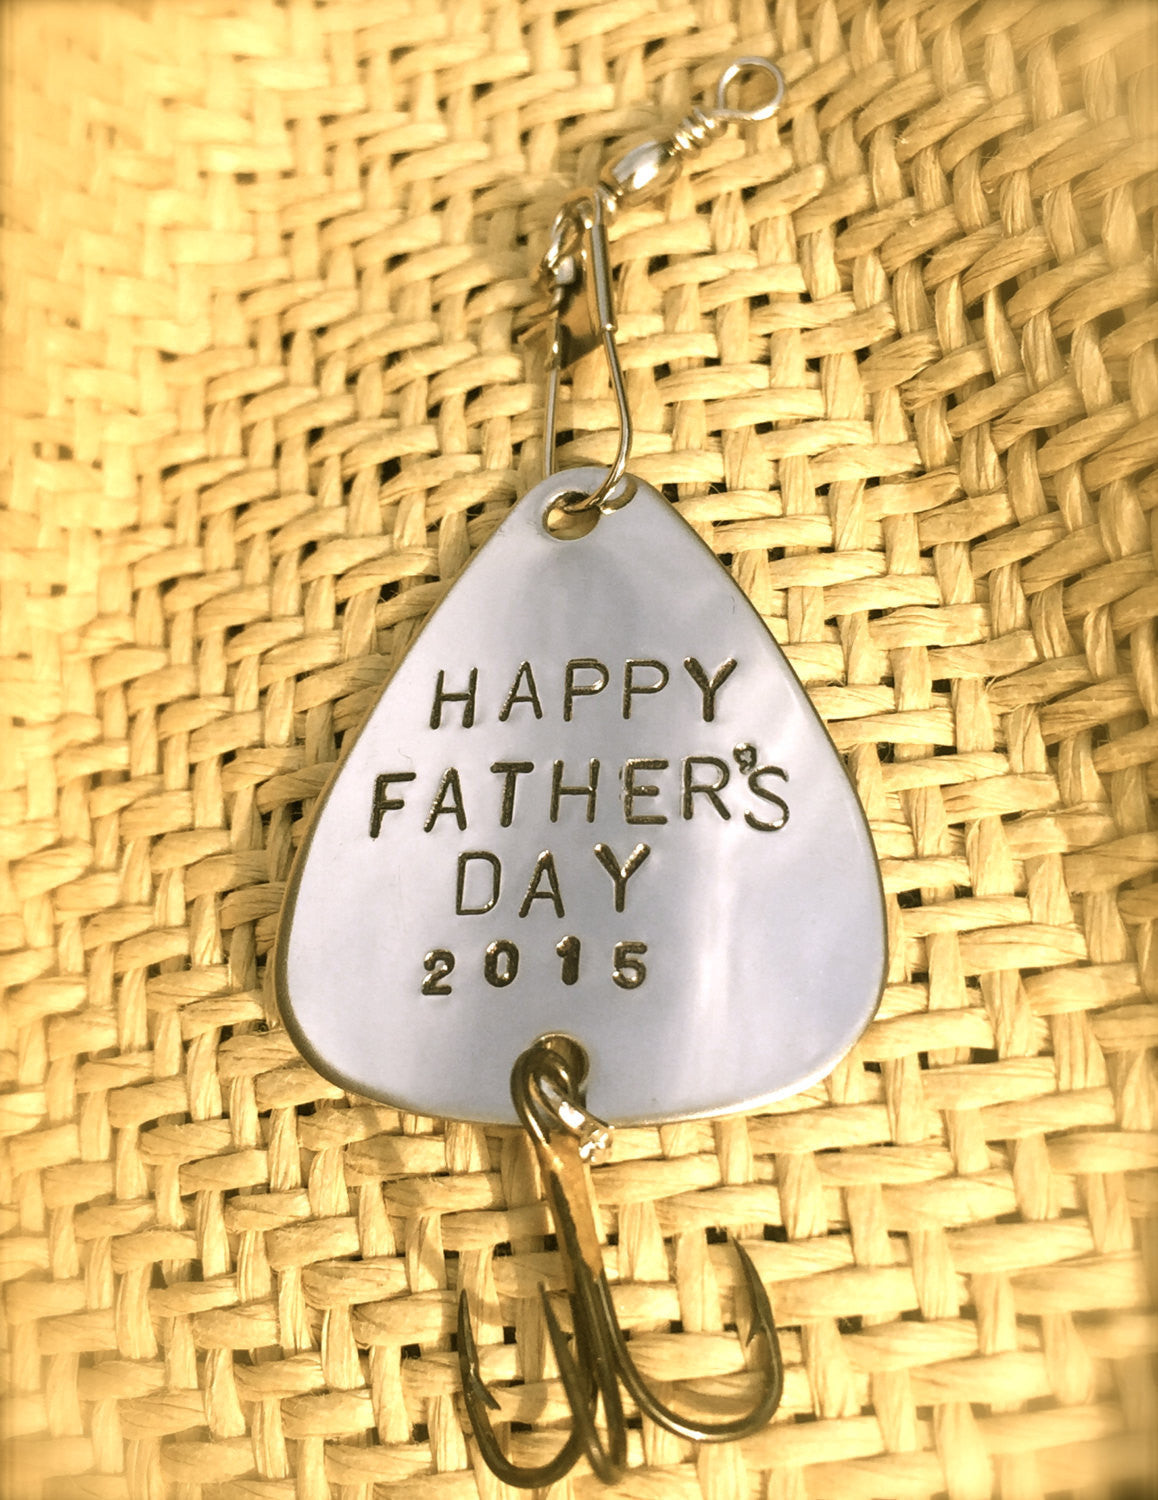 Personalized Fishing Lure, Happy Fathers Day, My Best Catch, I'm hooked on you, Valentines Gift Men, natashaaloha - Natashaaloha, jewelry, bracelets, necklace, keychains, fishing lures, gifts for men, charms, personalized, 